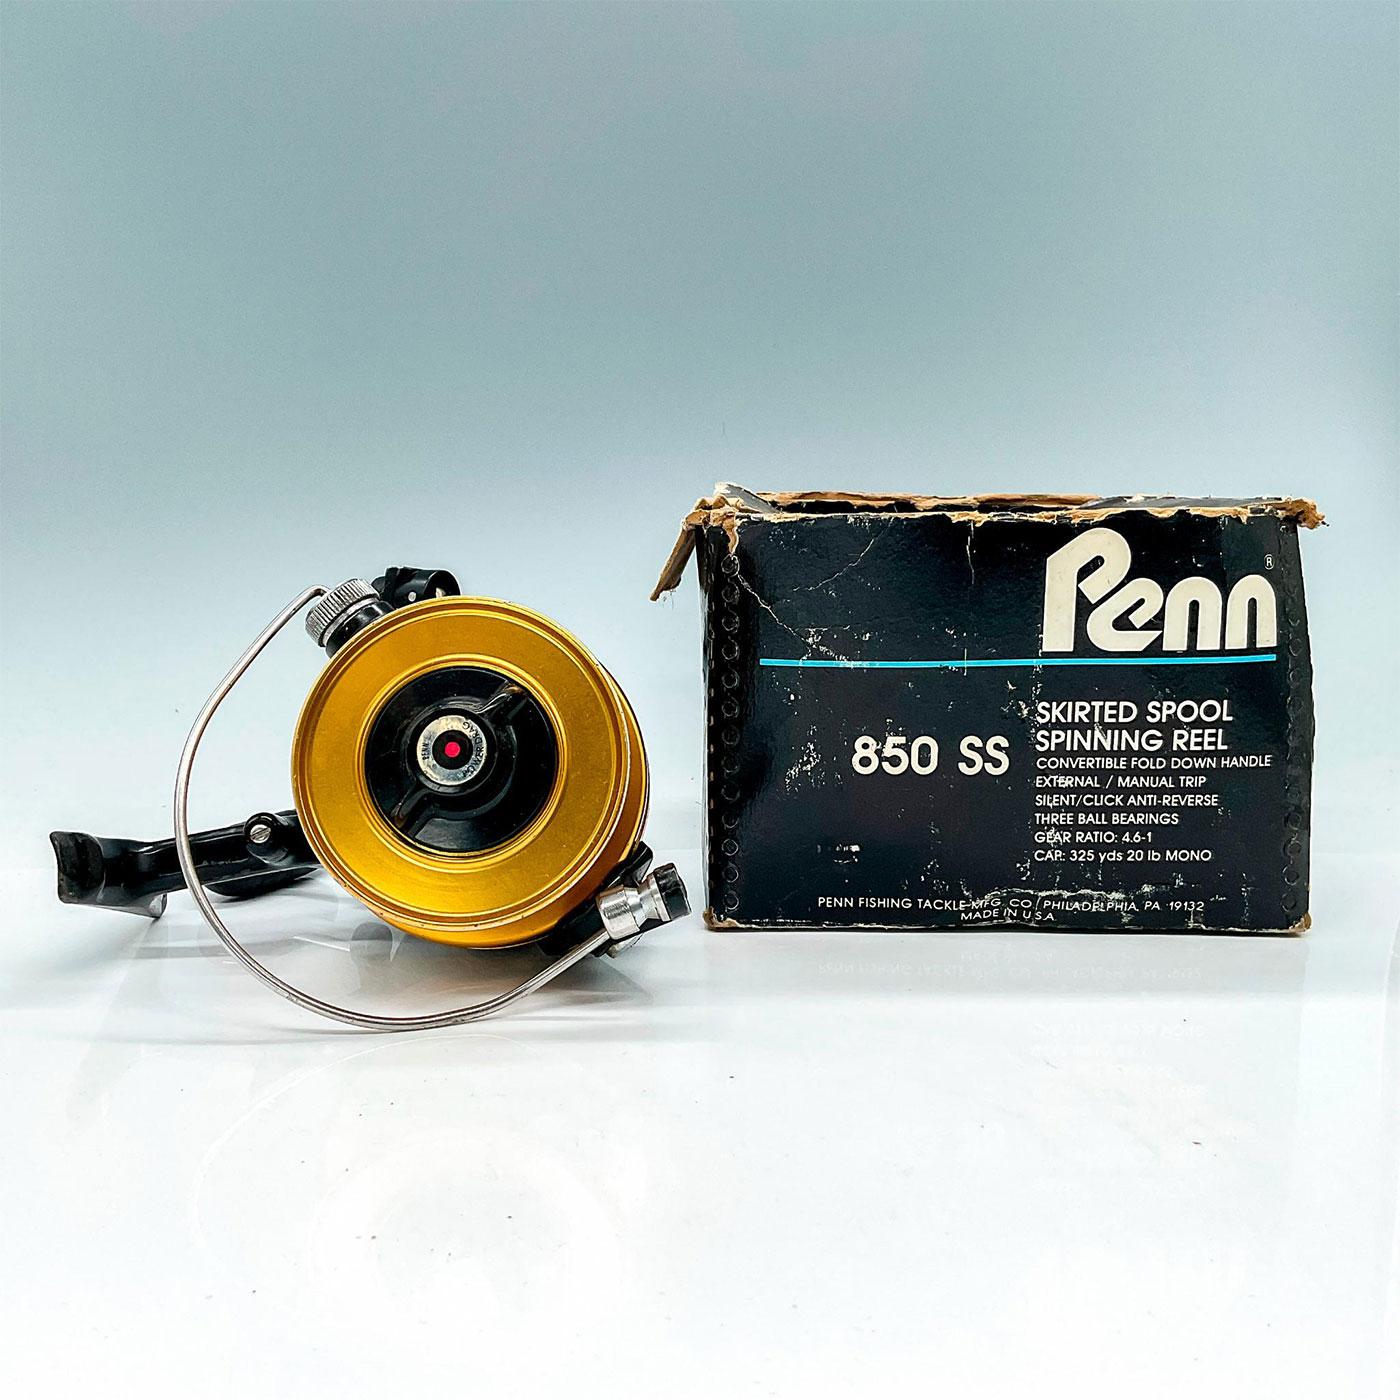 Vintage Penn 850 SS 3rd Gen Spinfisher Reel with Box